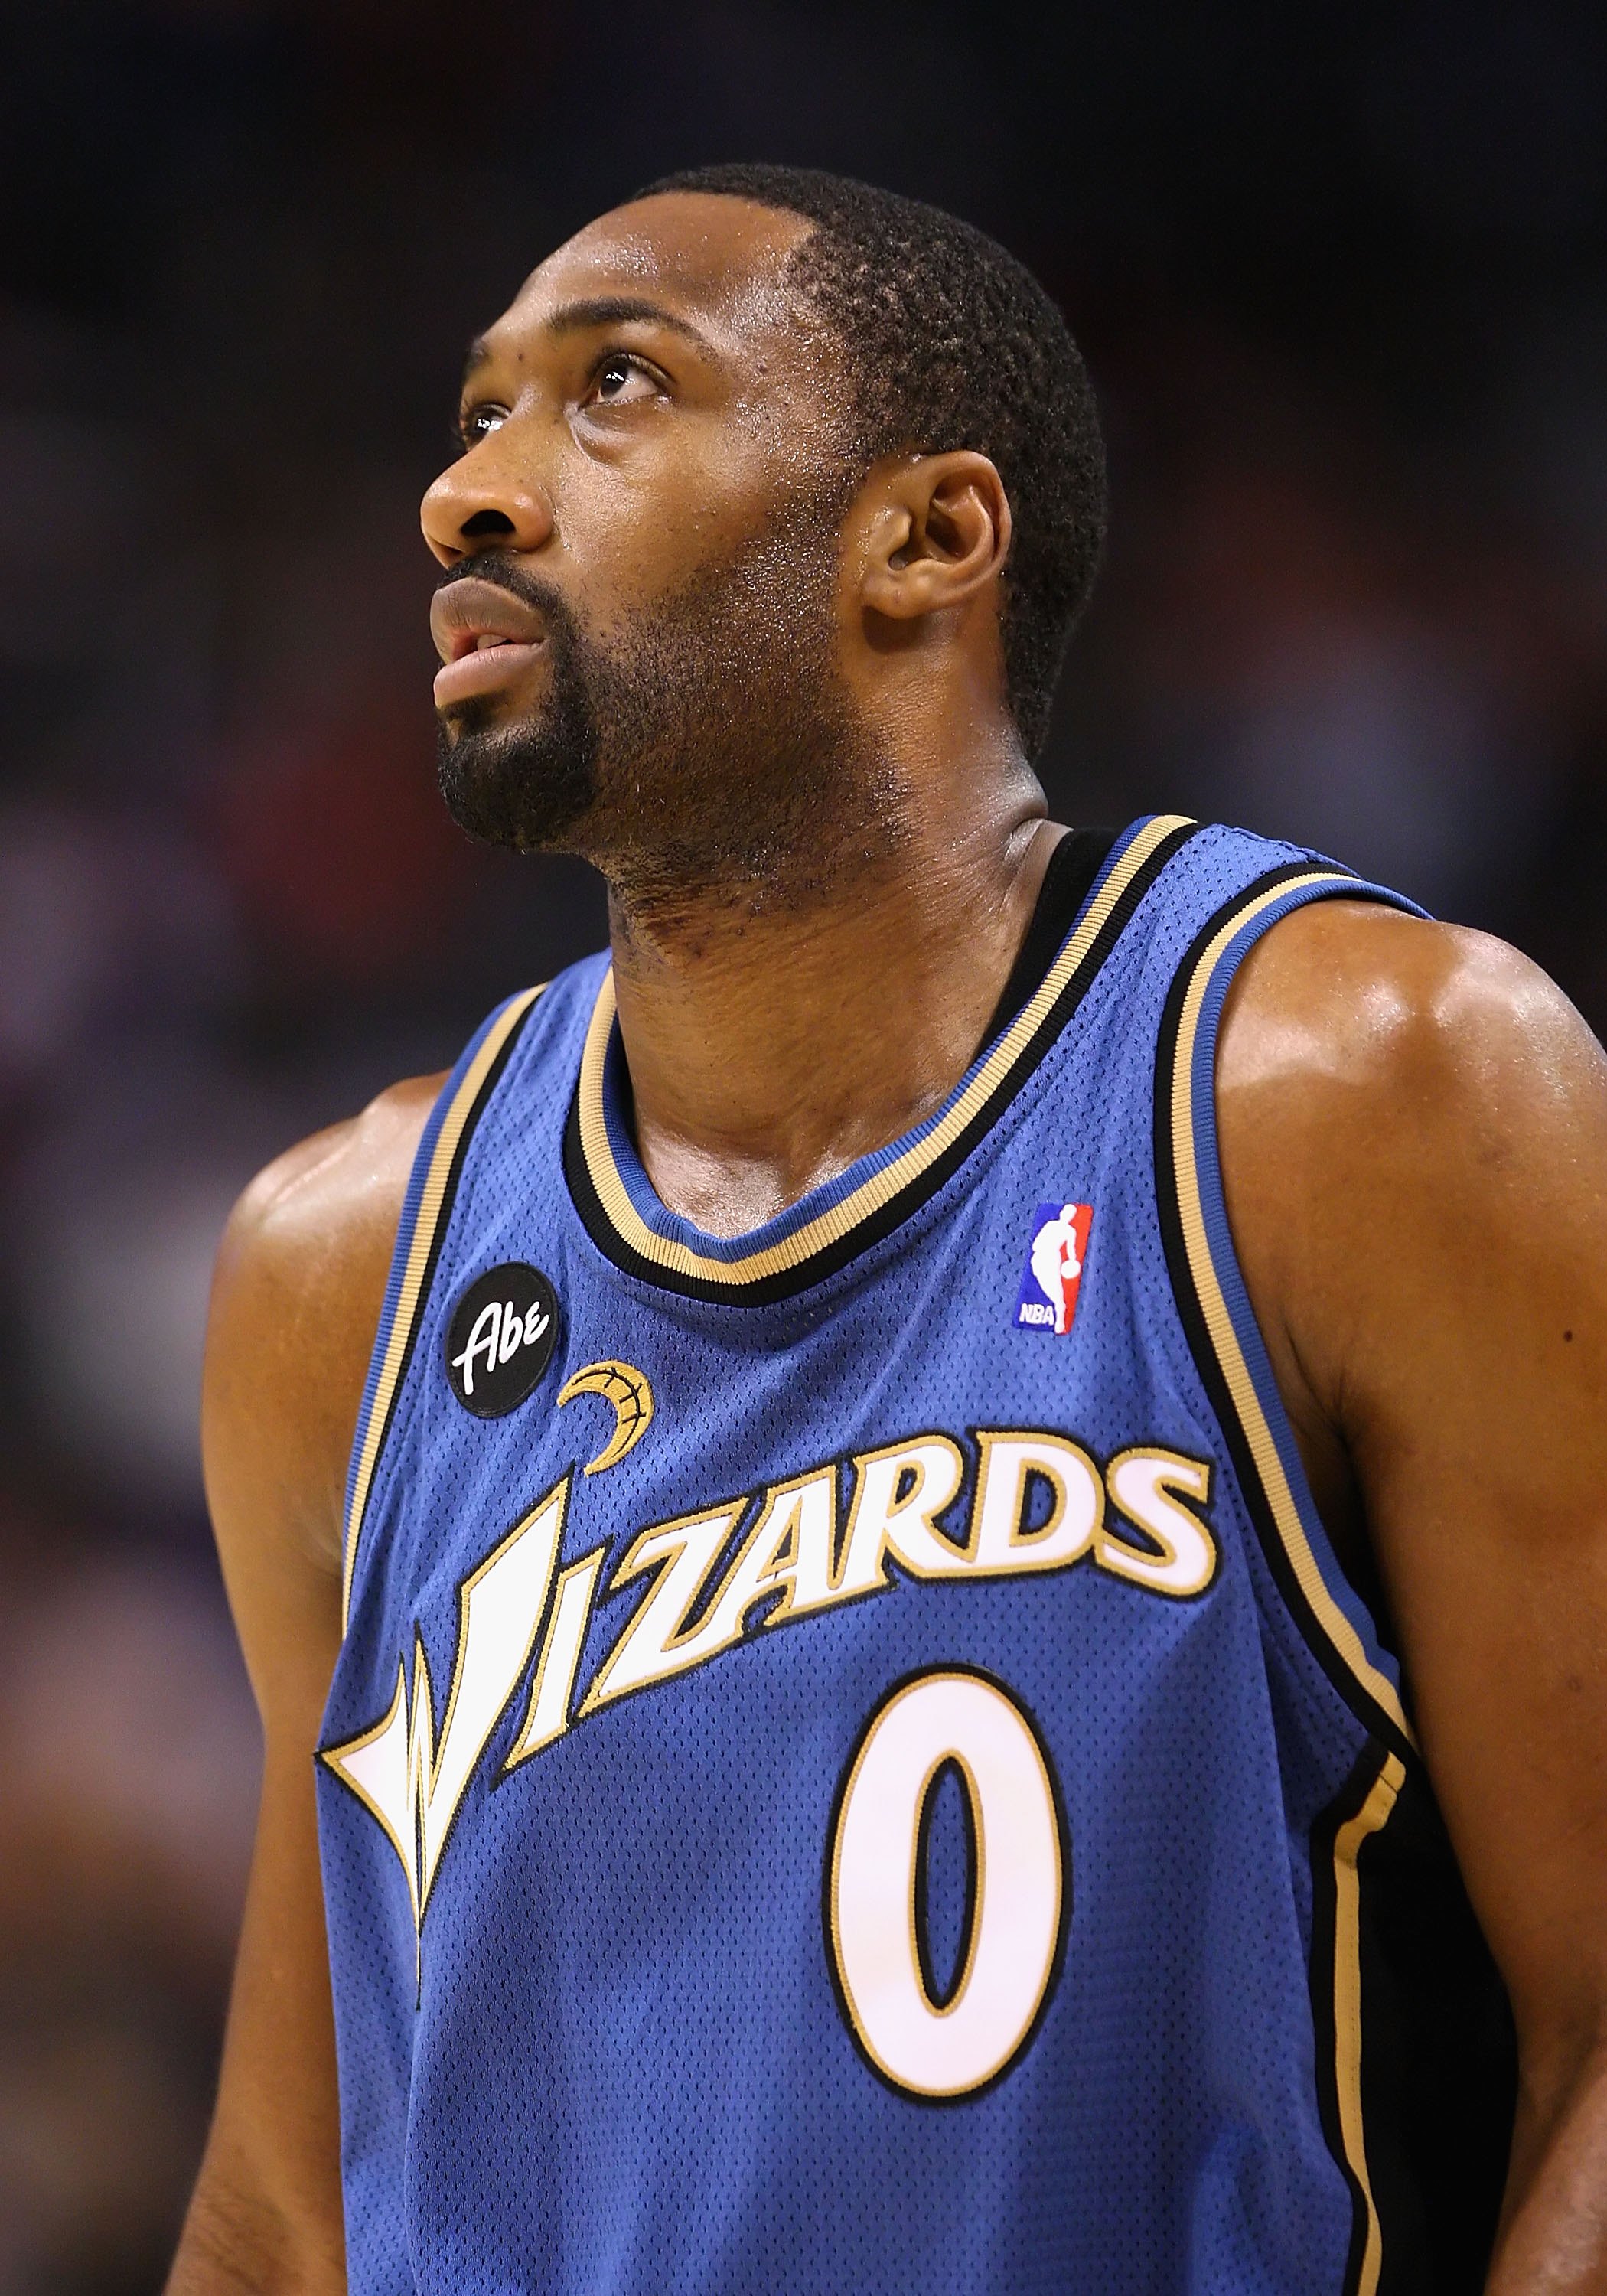 Washington Wizards: Where in the world is Gilbert Arenas?